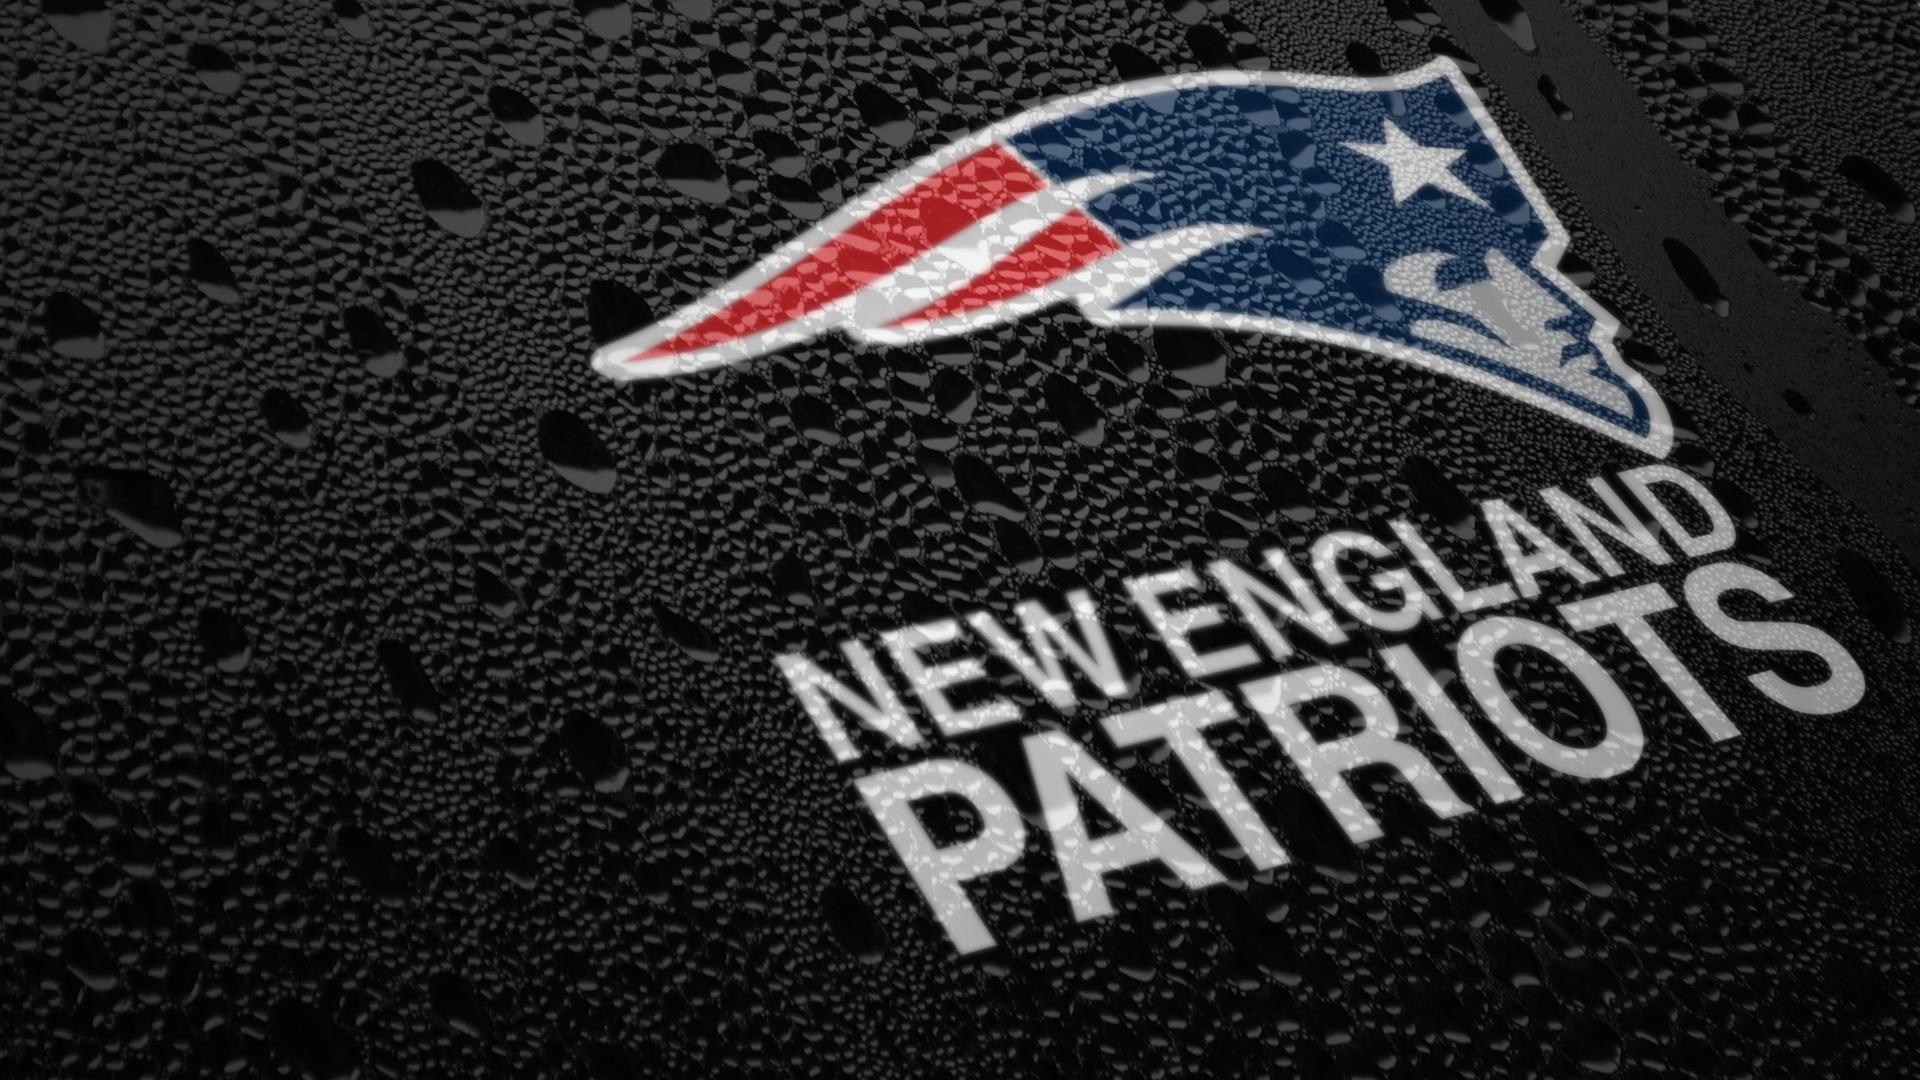 10 Top New England Patriots Hd Wallpapers FULL HD 1080p For PC Desktop